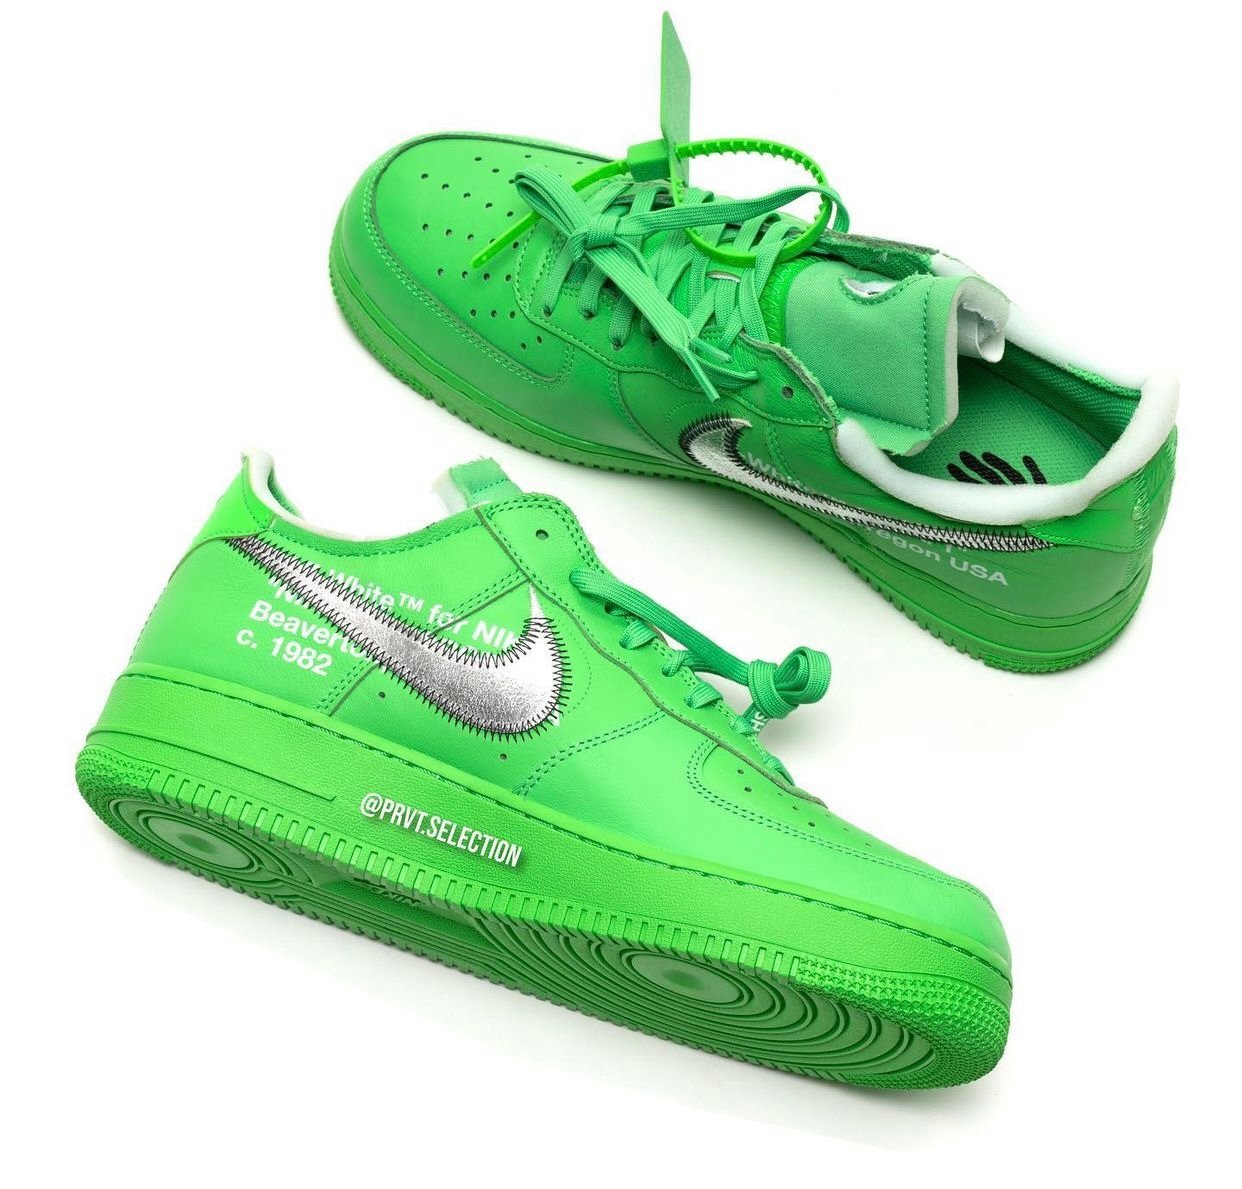 off white nike air force 1 low green dx1419 300 release date info 7